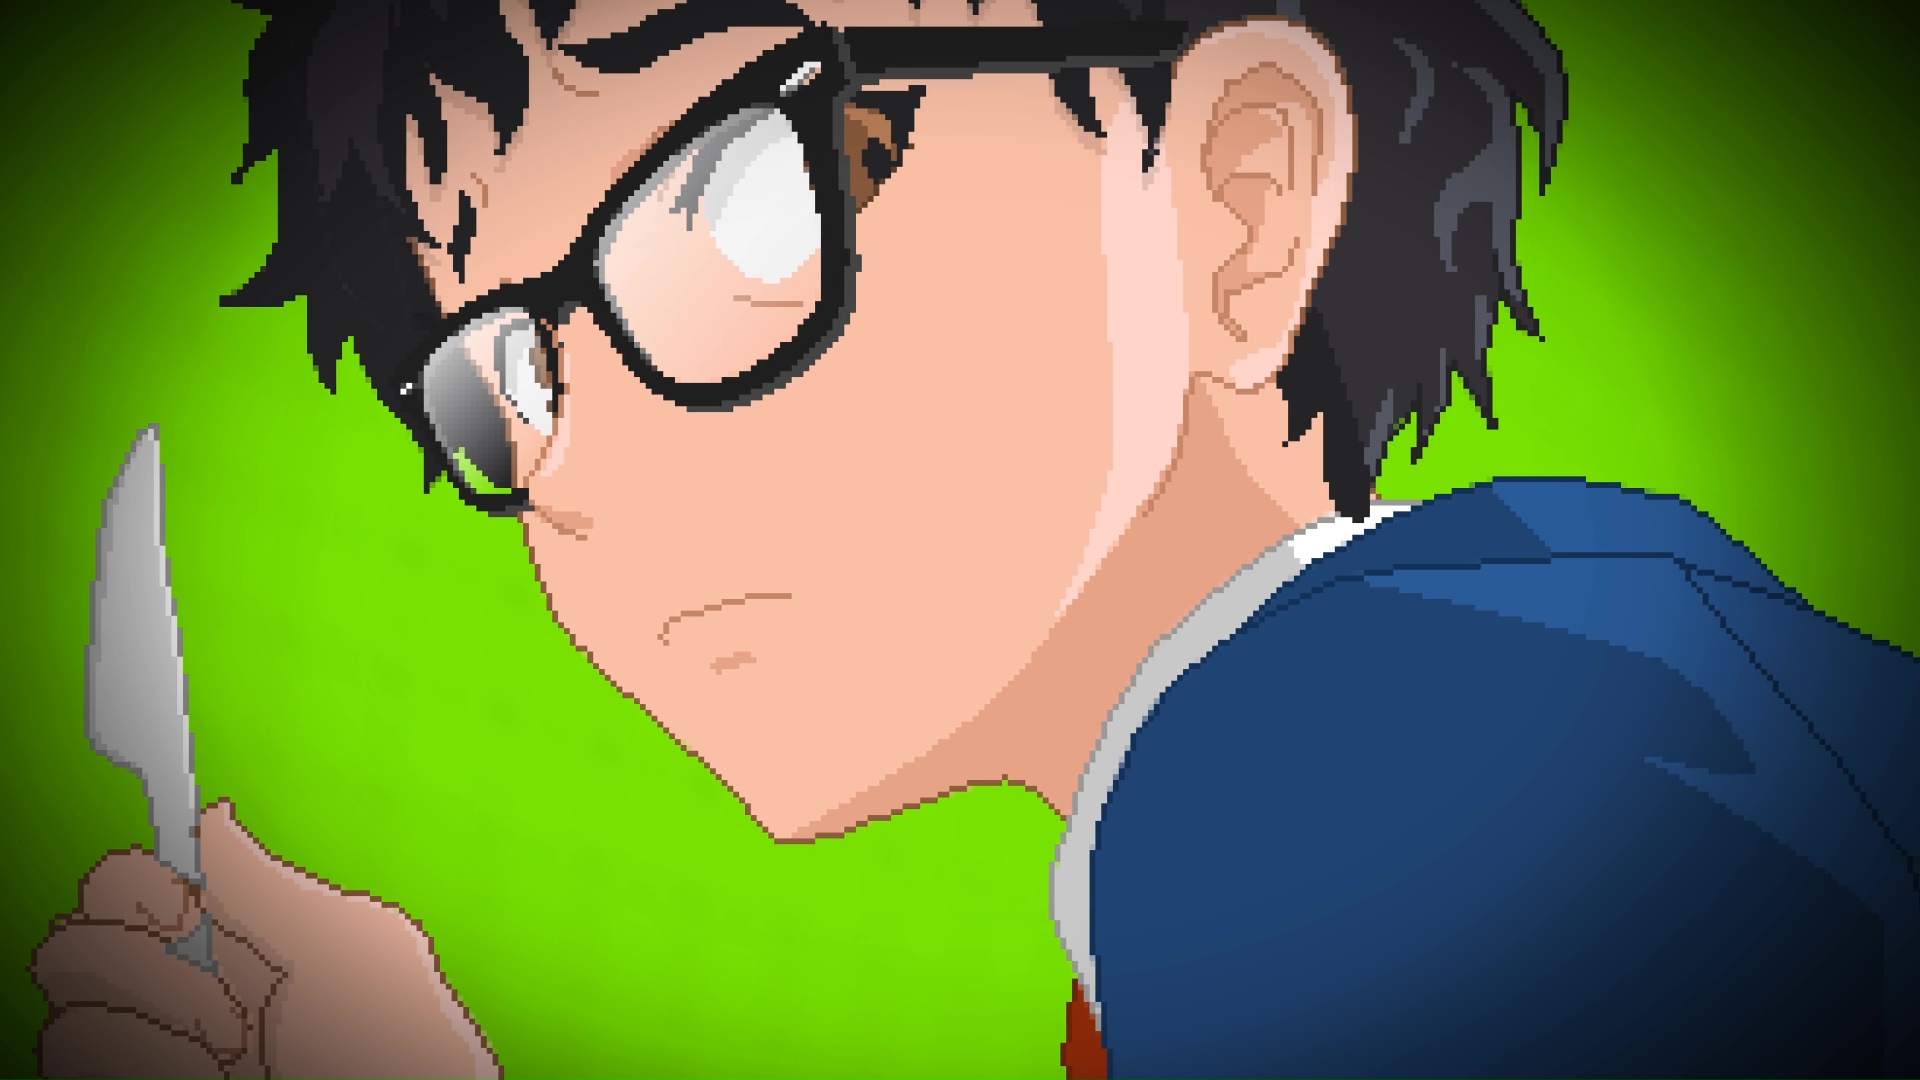 Yuppie Psycho is coming to Xbox